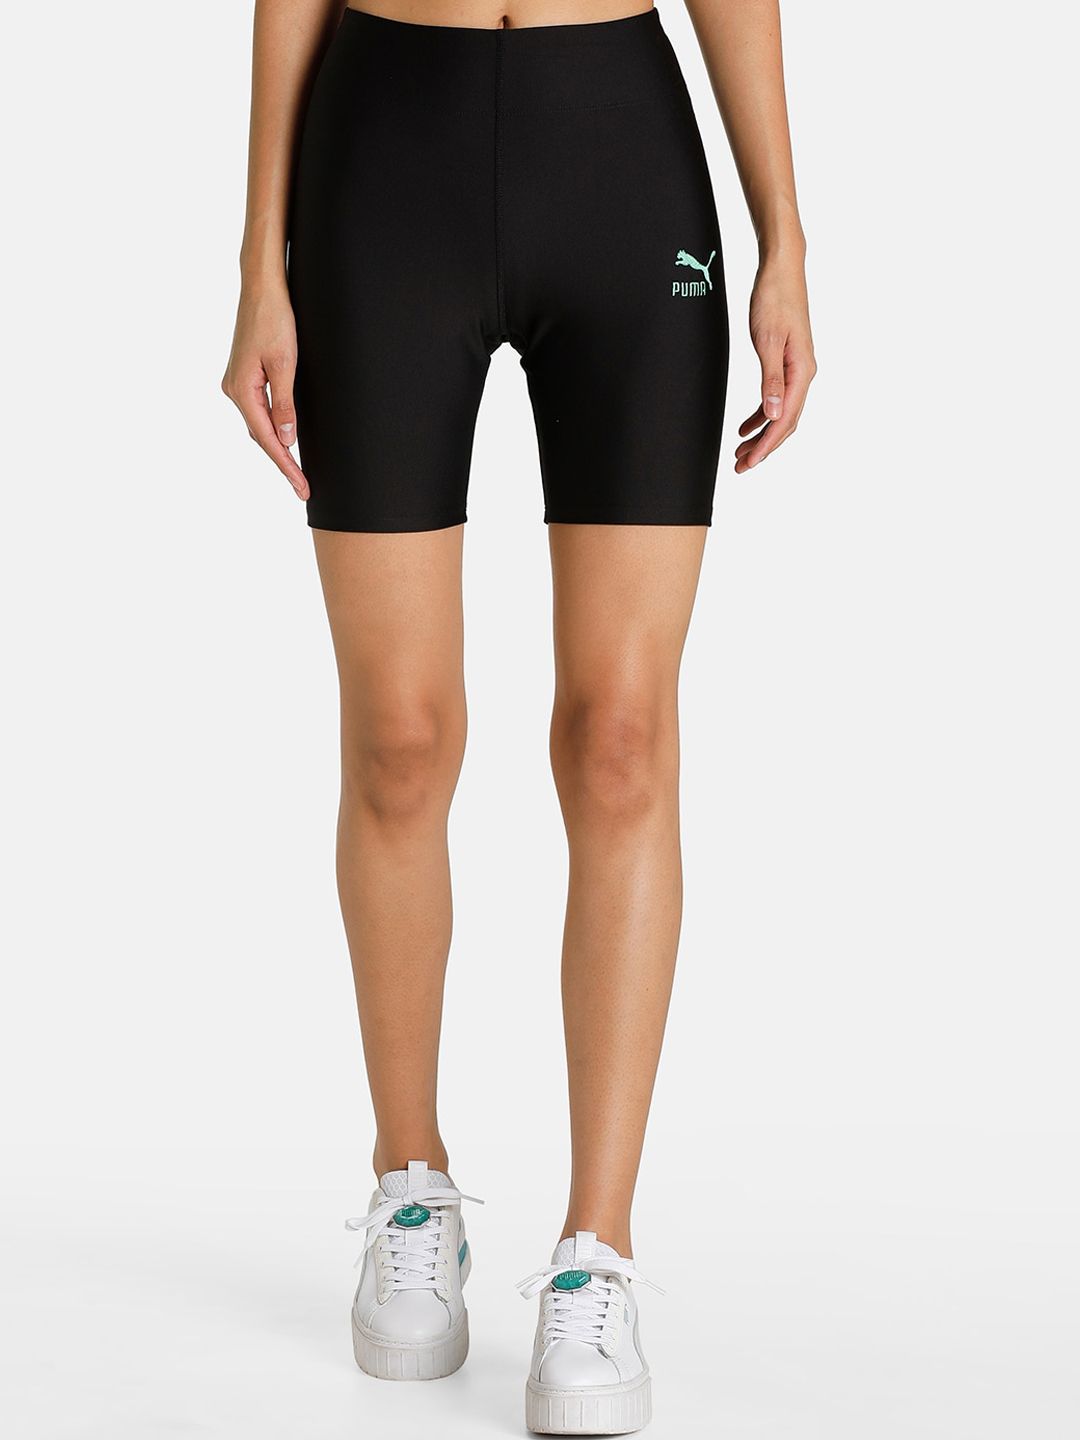 Puma Women Black Slim Fit High-Rise Cycling Sports Shorts -53663101 Price in India